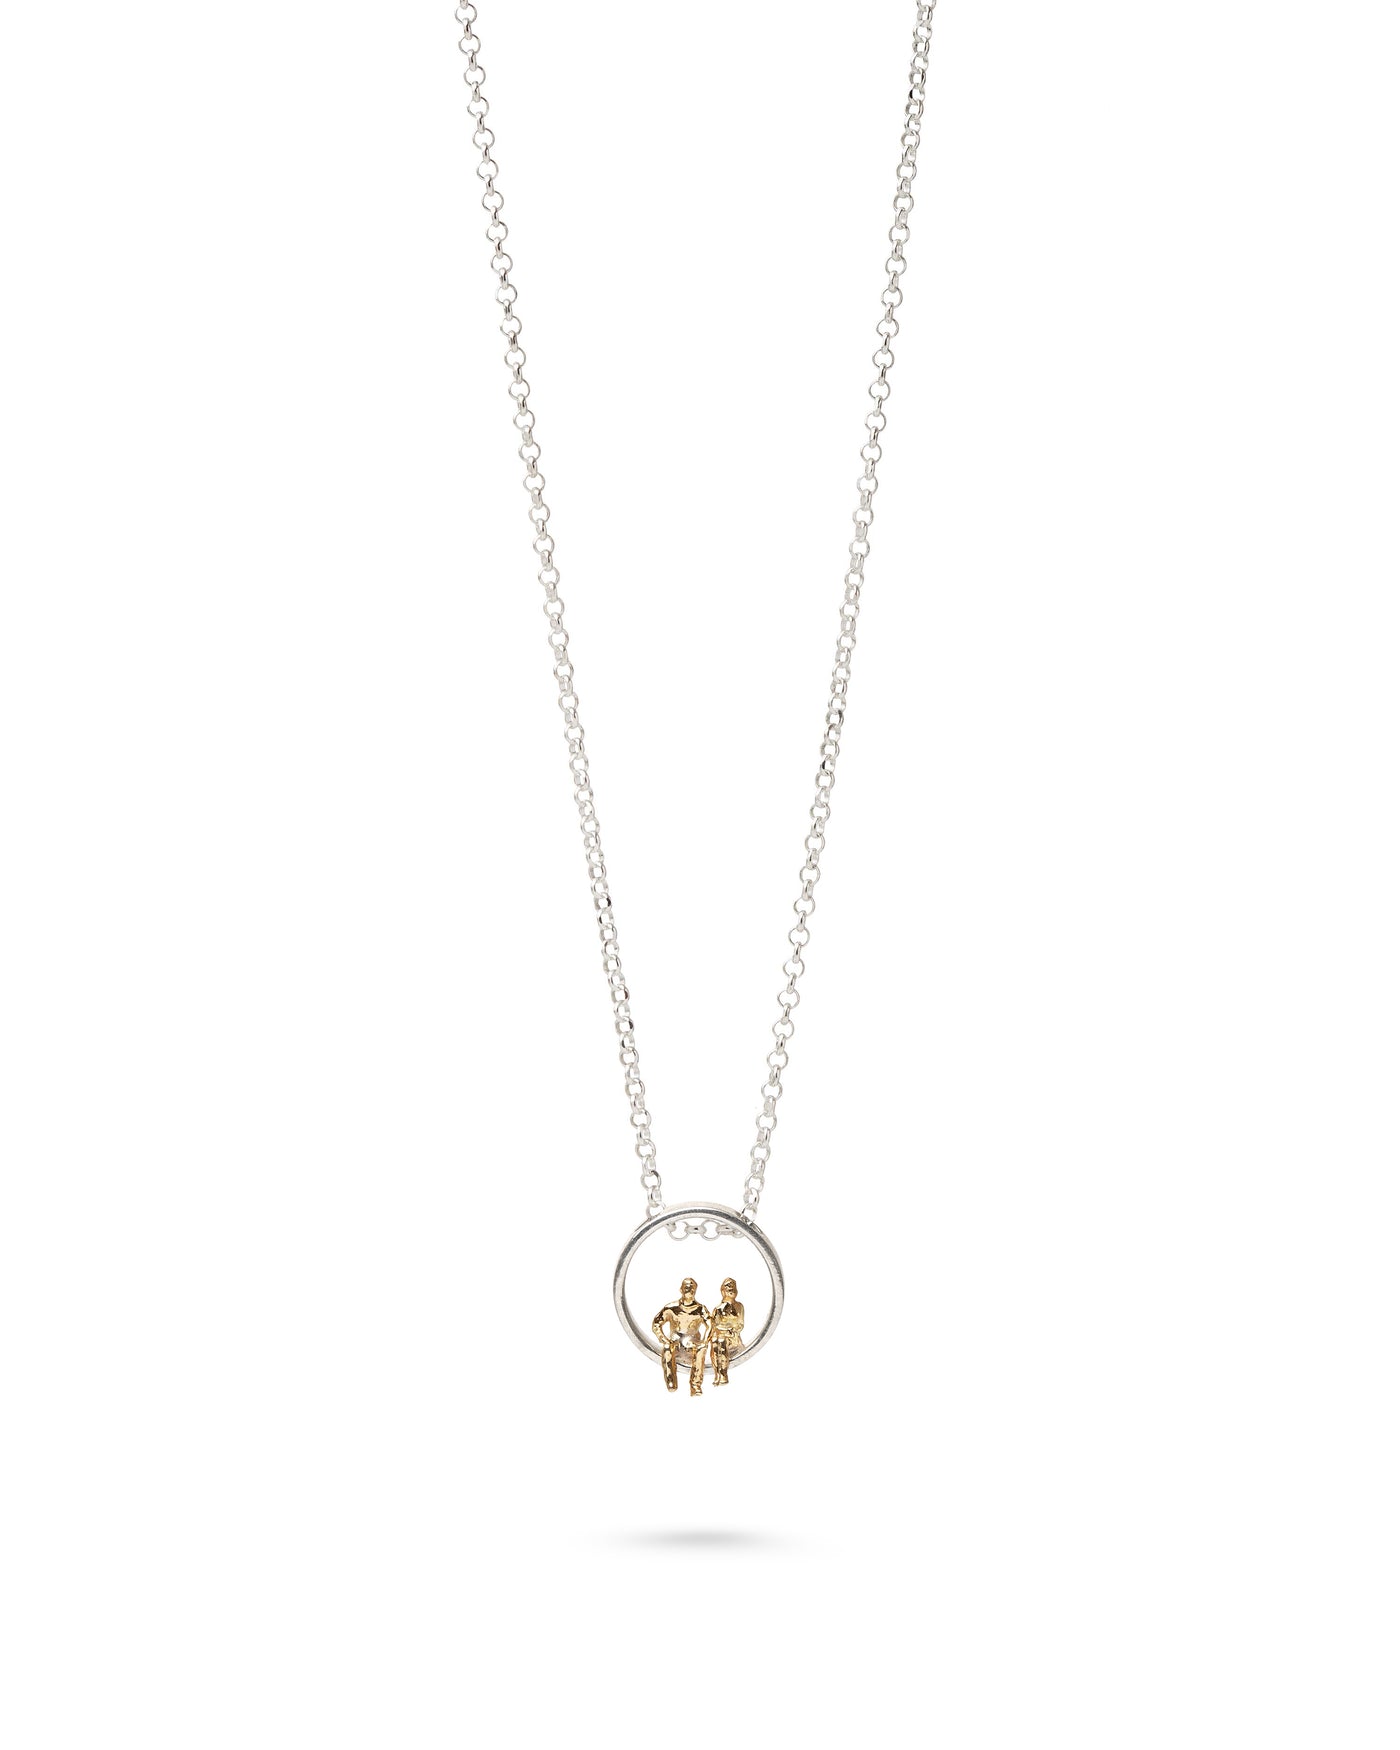 18 k gold and 14 k white gold necklace "TOGETHER"